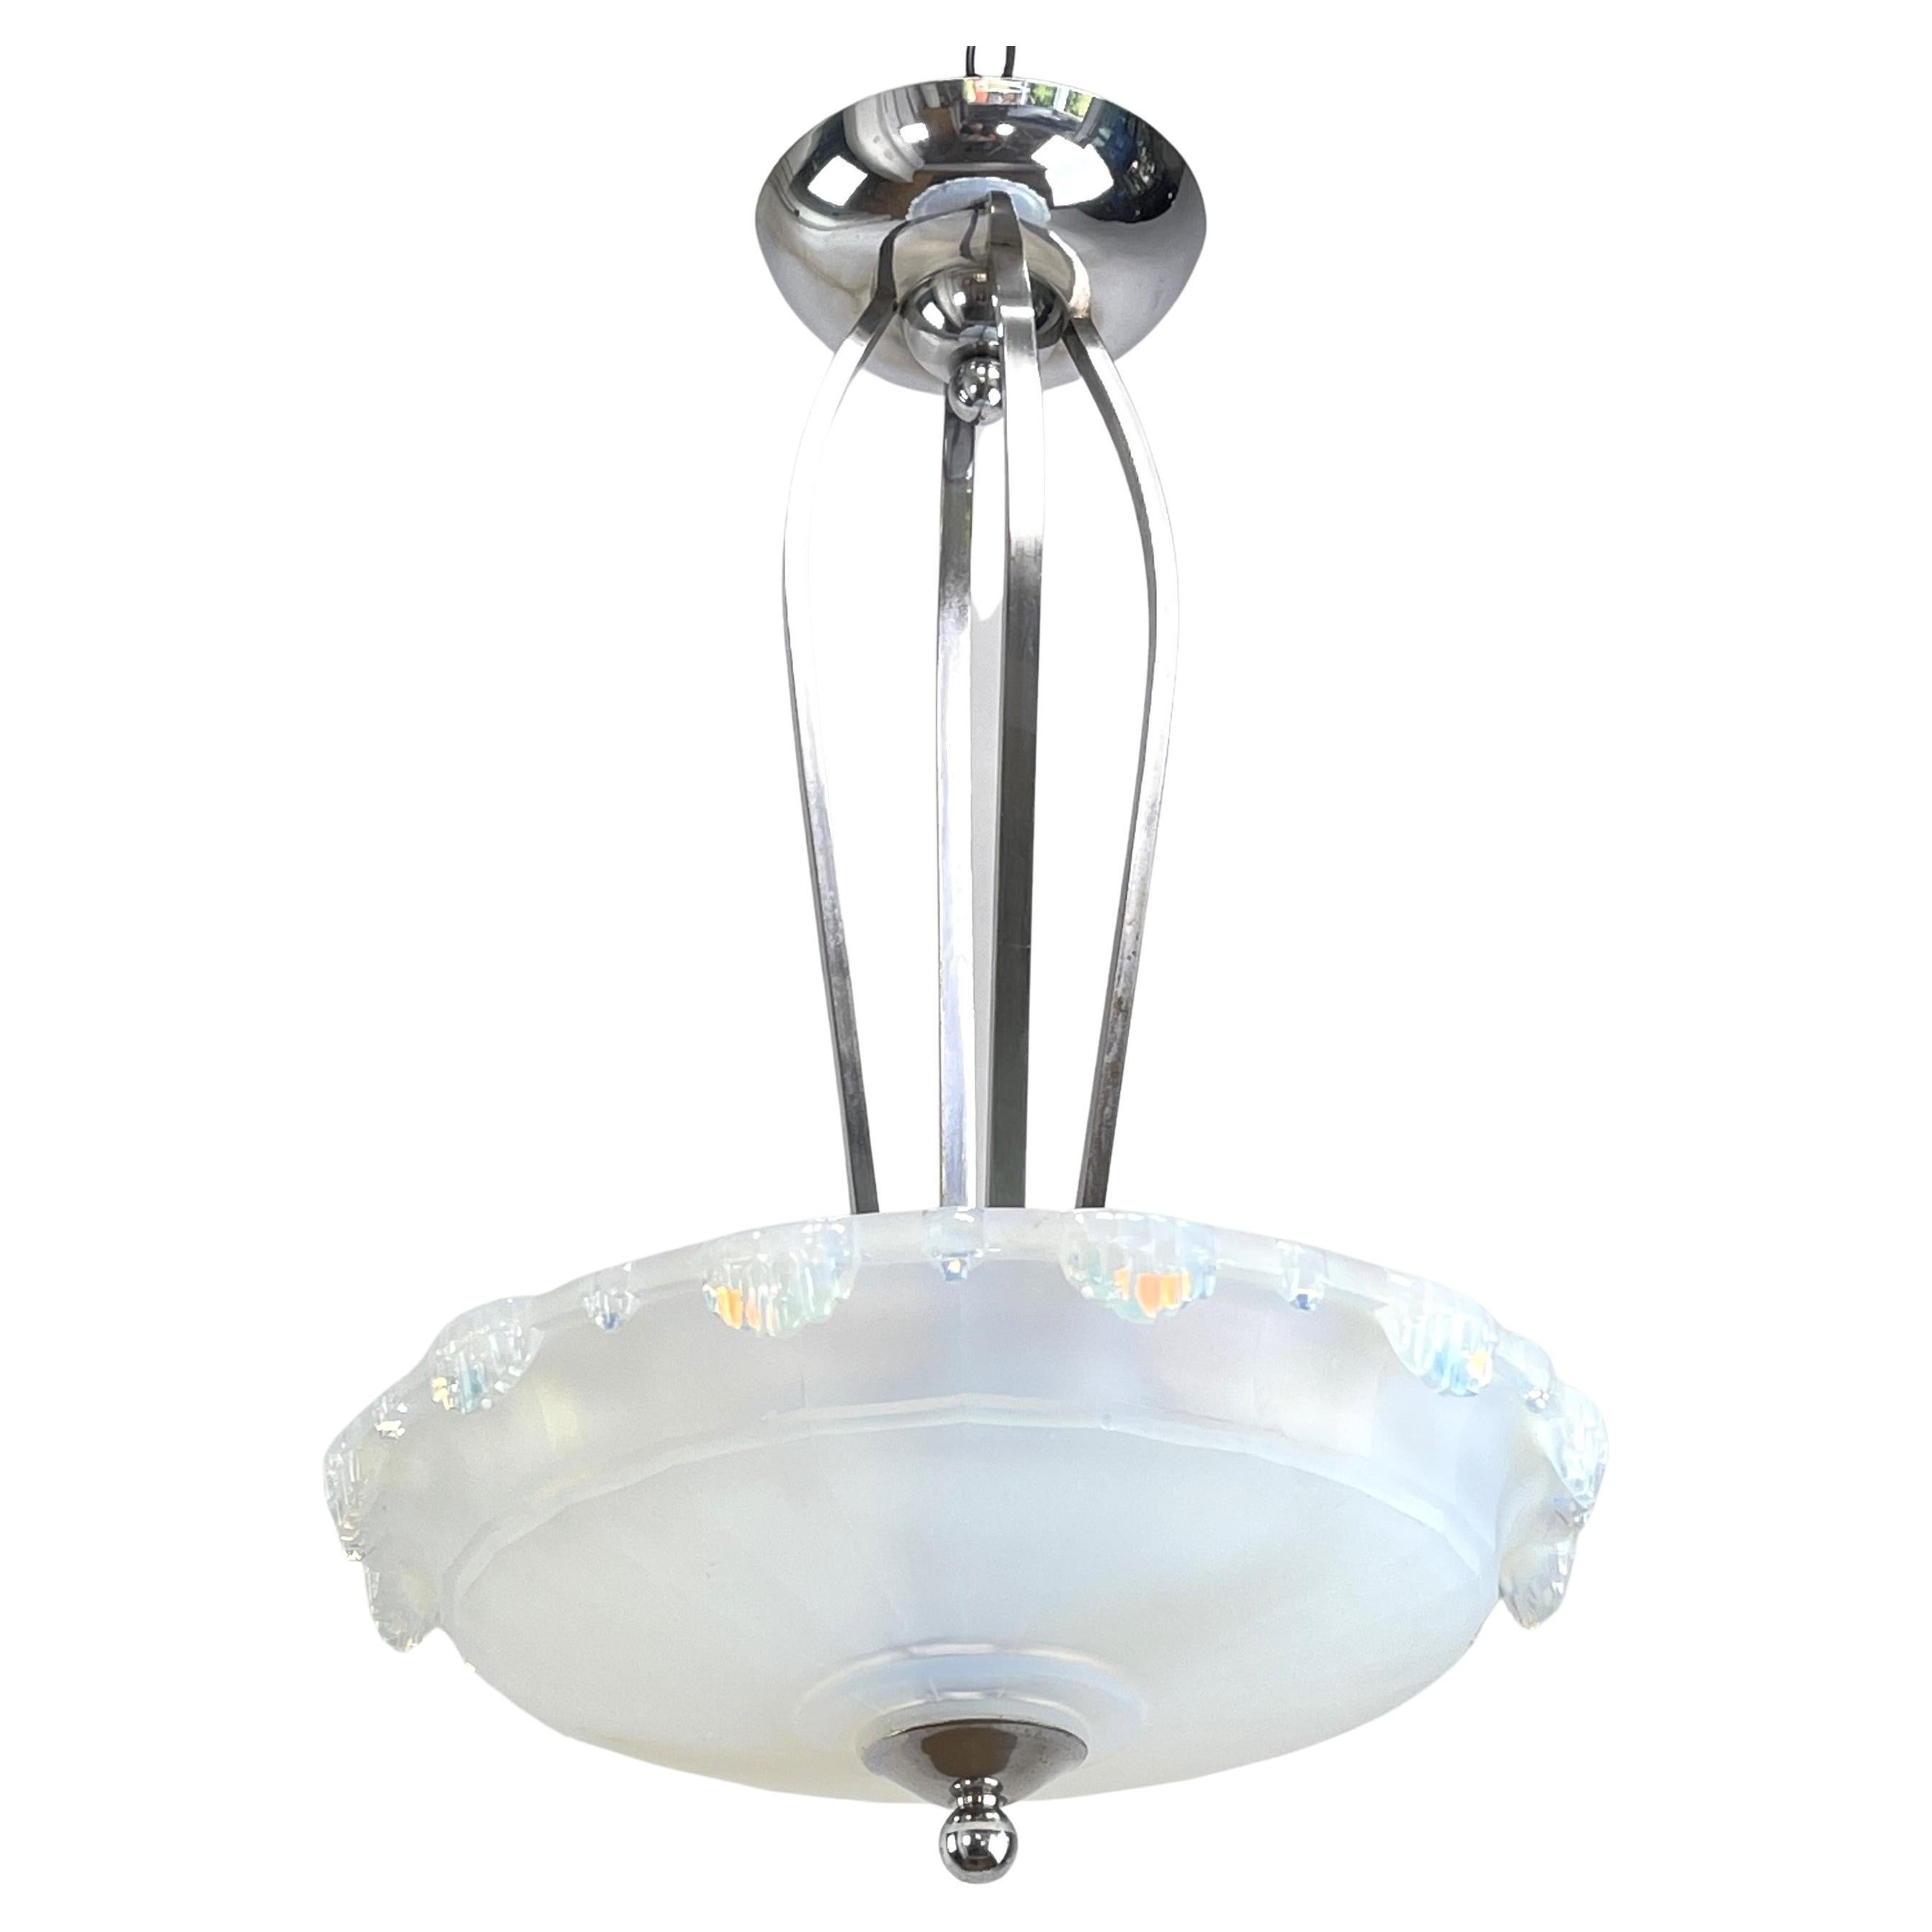 Art Deco Chandelier  - 1930s

This original pendant lamp captivates with its simple and sober Art Deco design. The lamp is not signed and gives a very pleasant light. This ceiling lamp is an absolute design classic from the ART DECOS period.

The